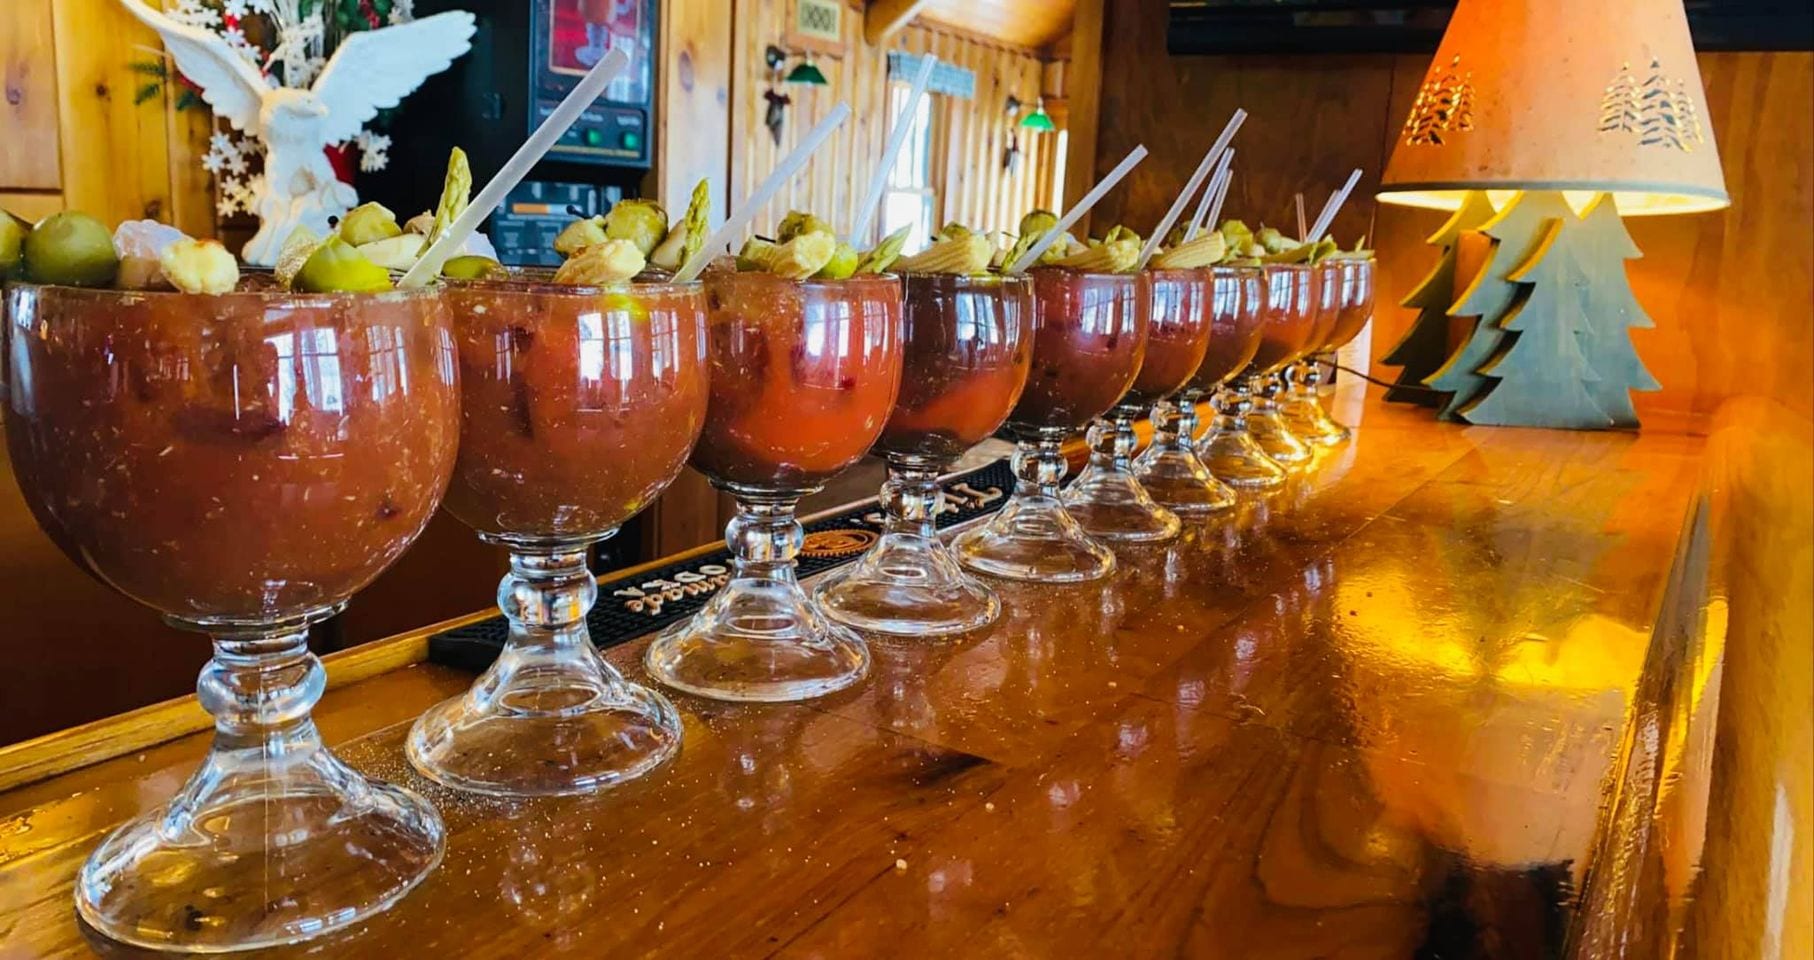 Lineup of Bloody Marys.